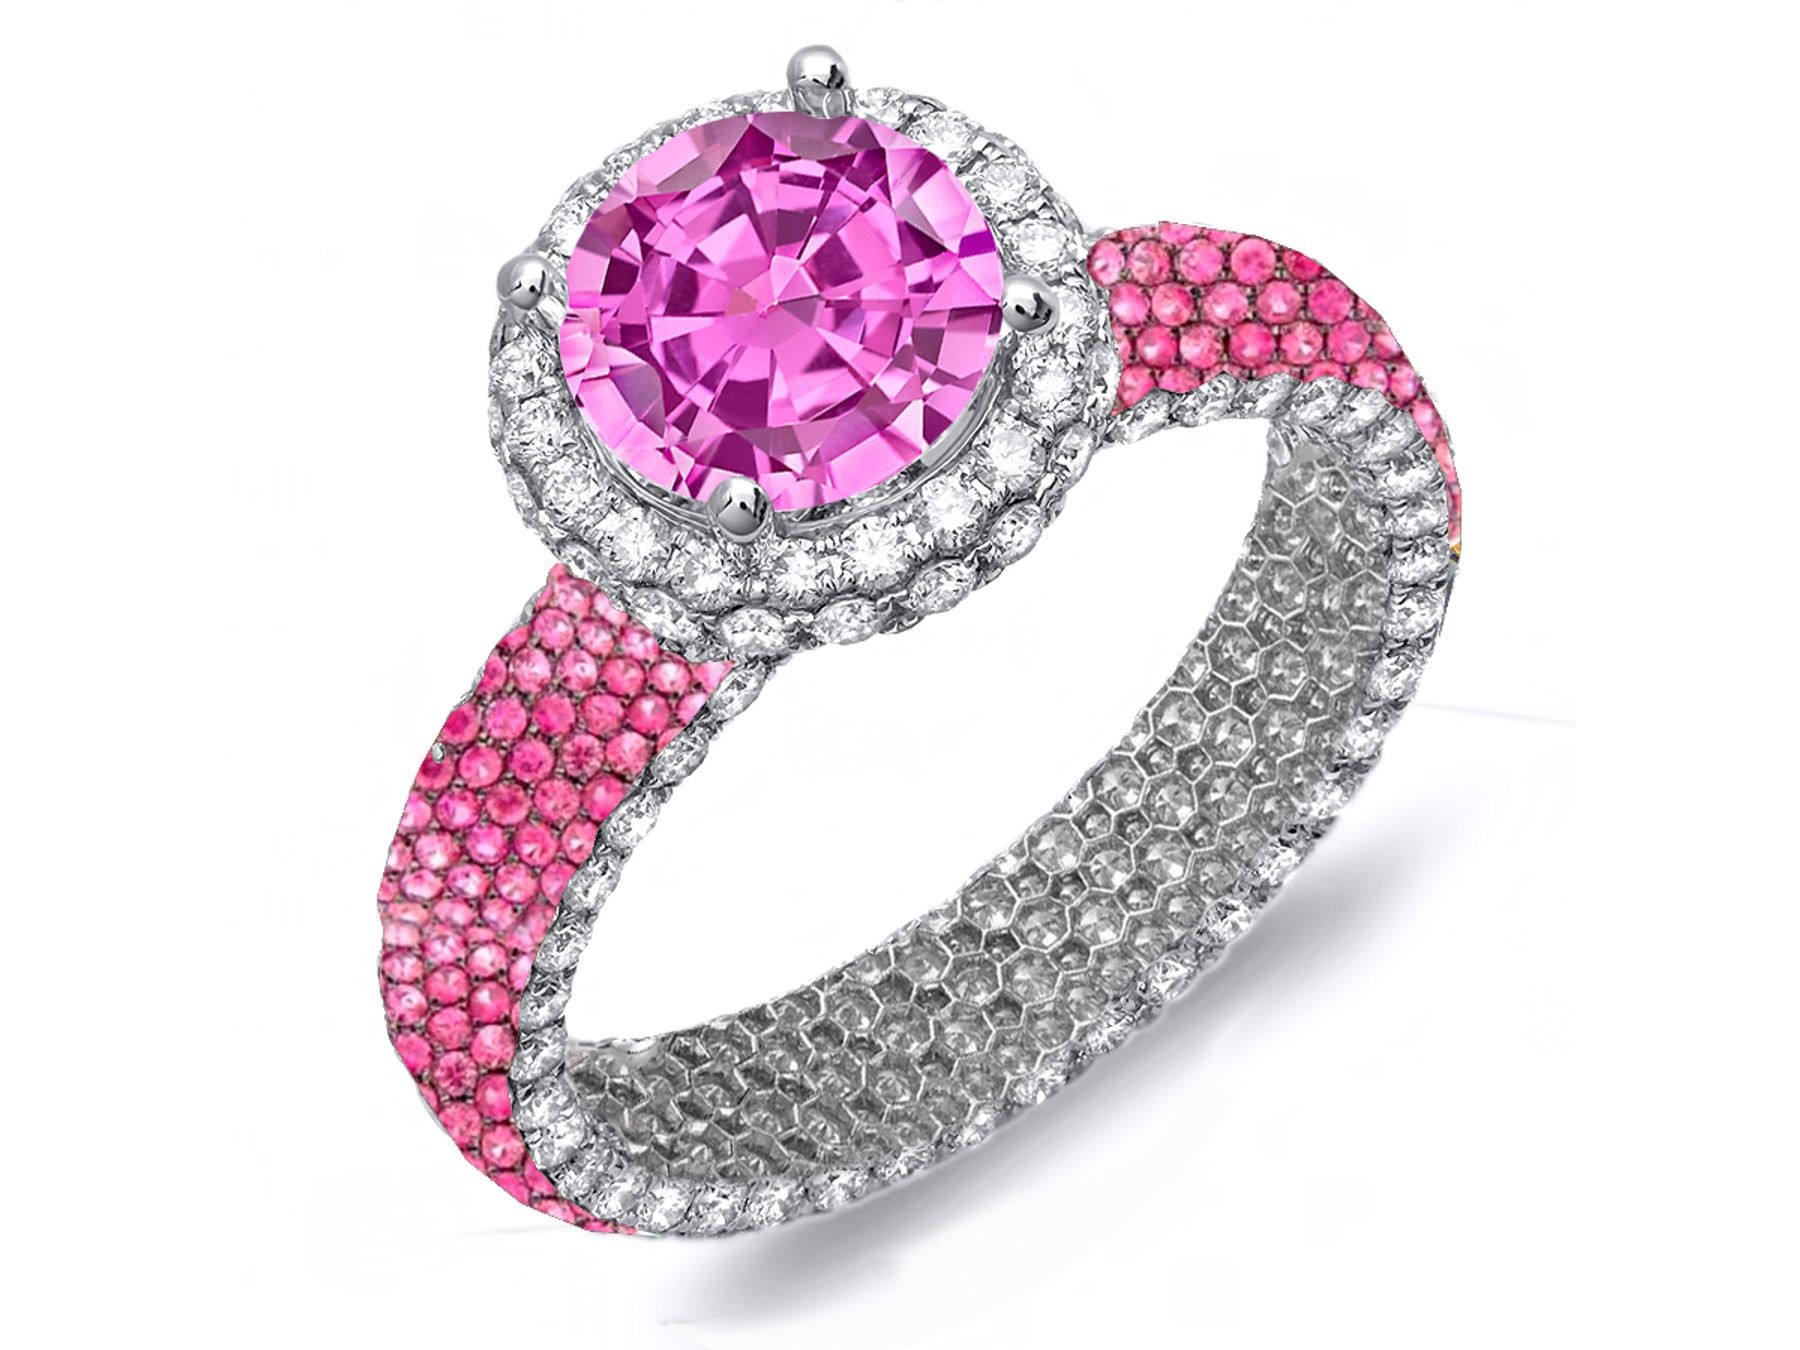 High-Quality Micro Pave Cluster Diamond & Multi-Colored Precious Stones Rubies, Emeralds & Blue, Pink, Purple, Yellow Sapphires